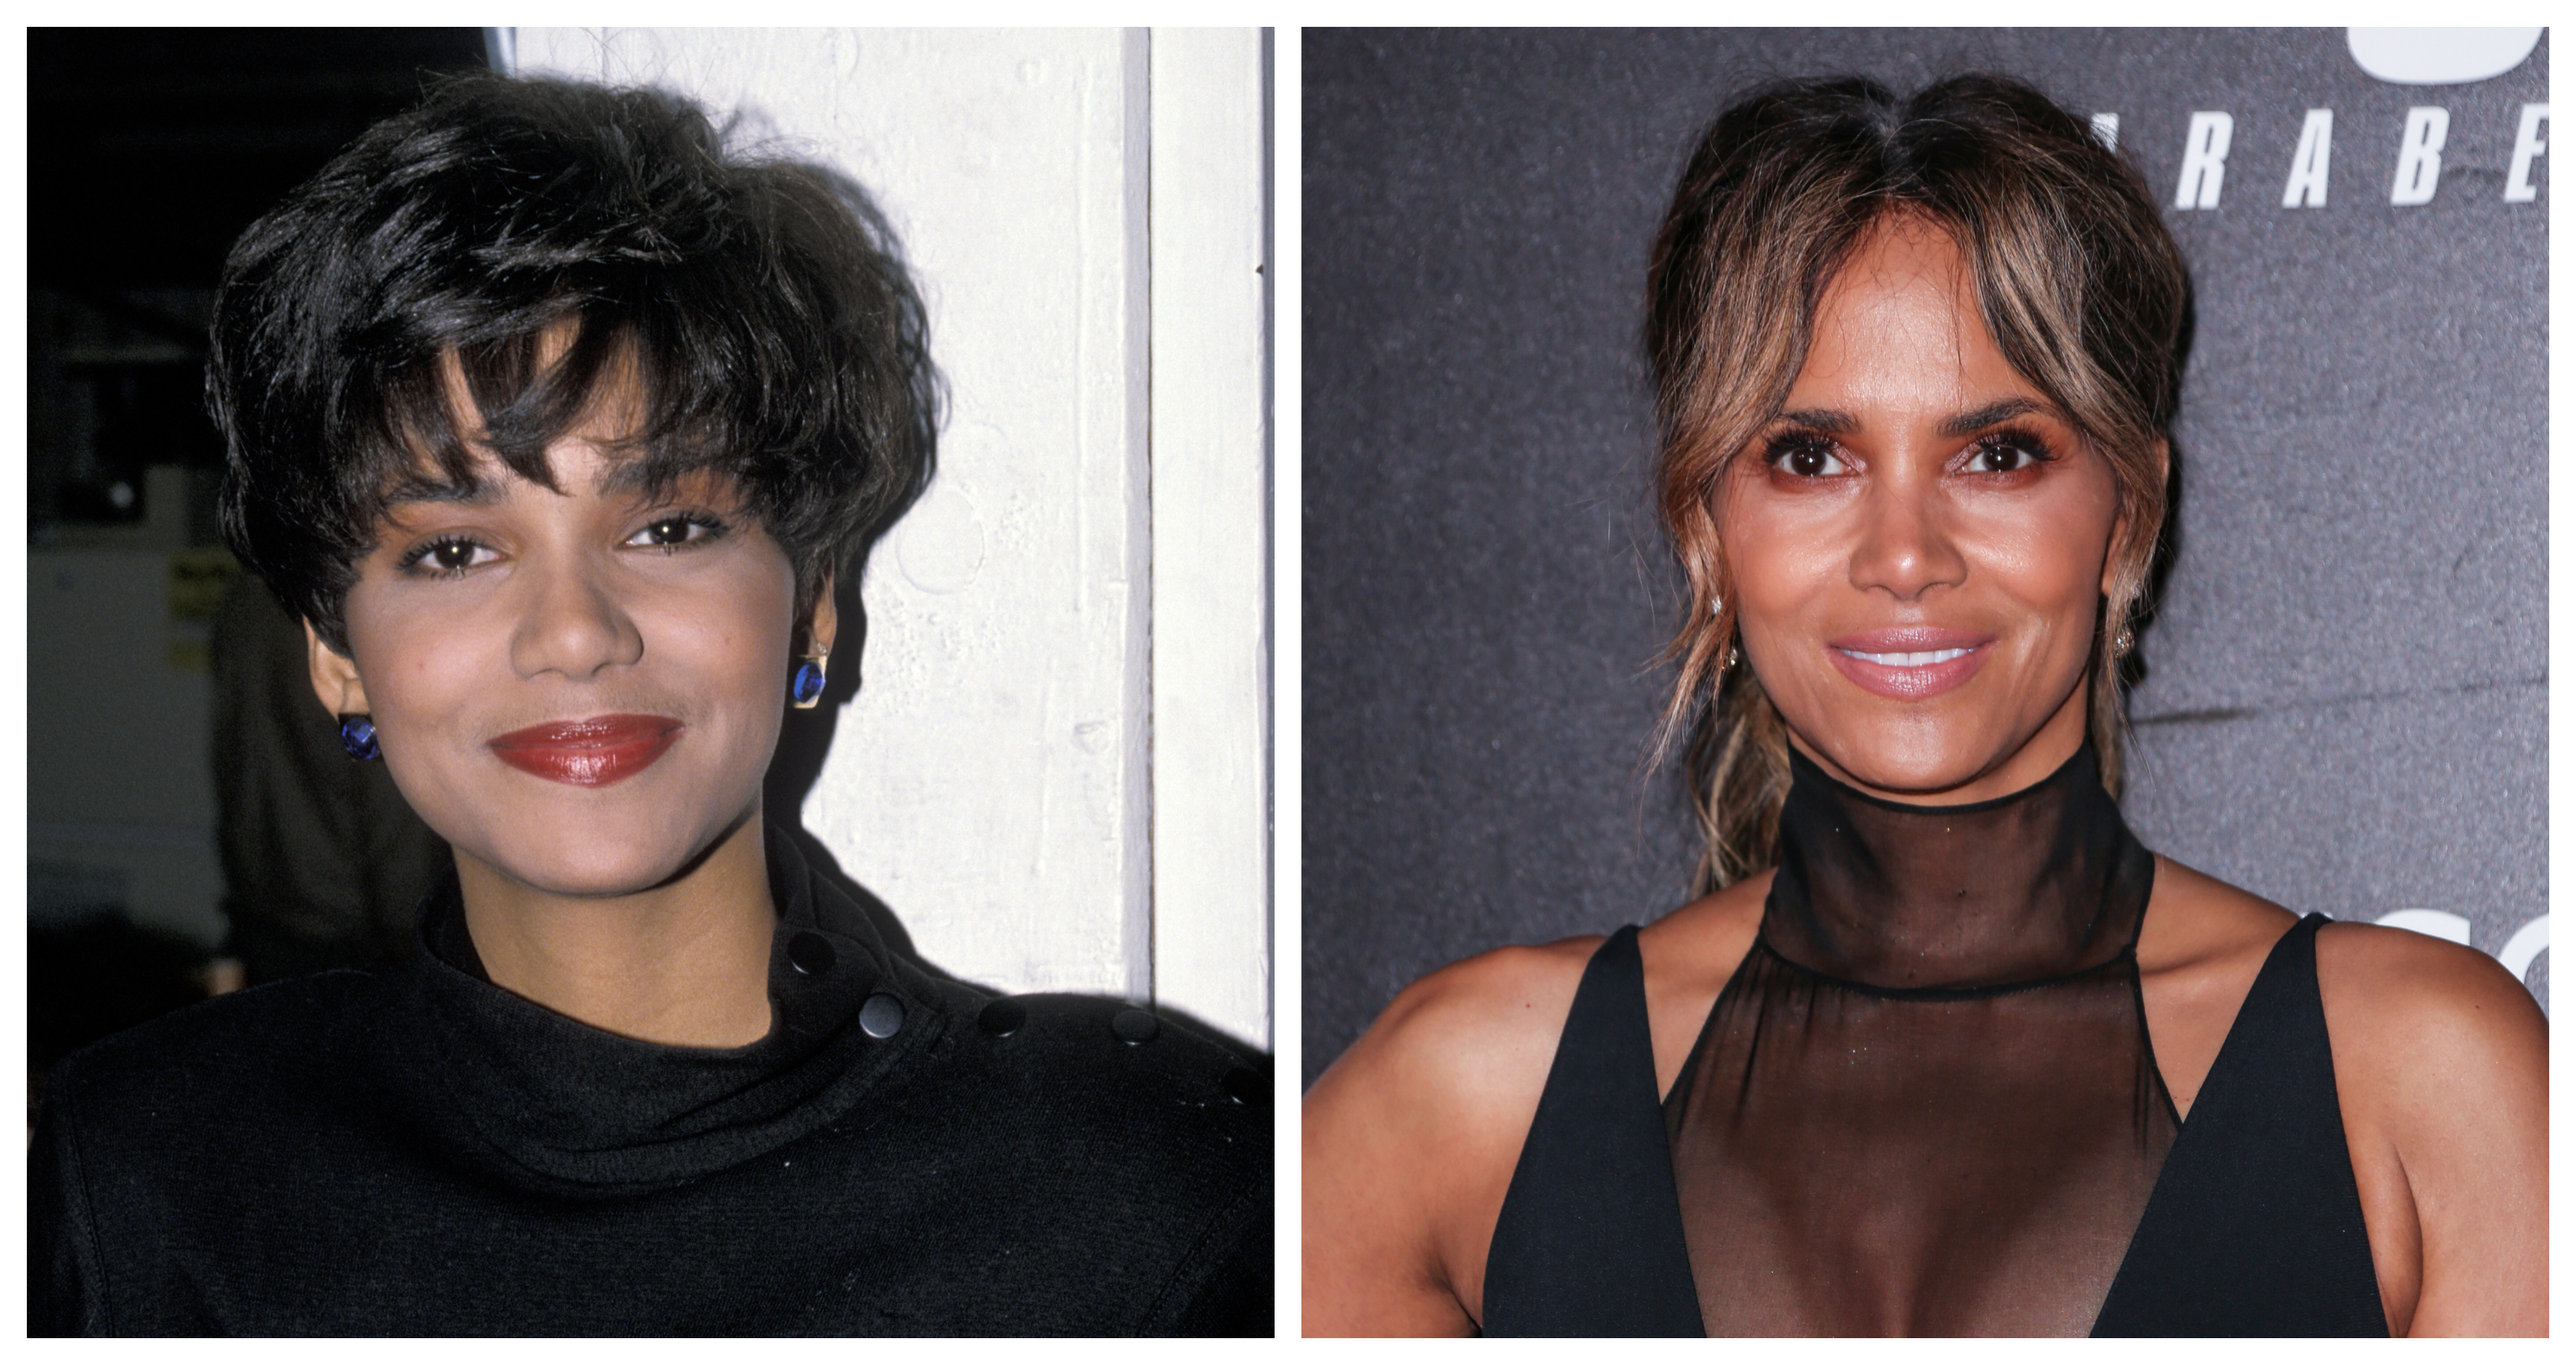 Halle Berry Porn Star - Halle Berry Then and Now: See the Actress' Complete Transformation